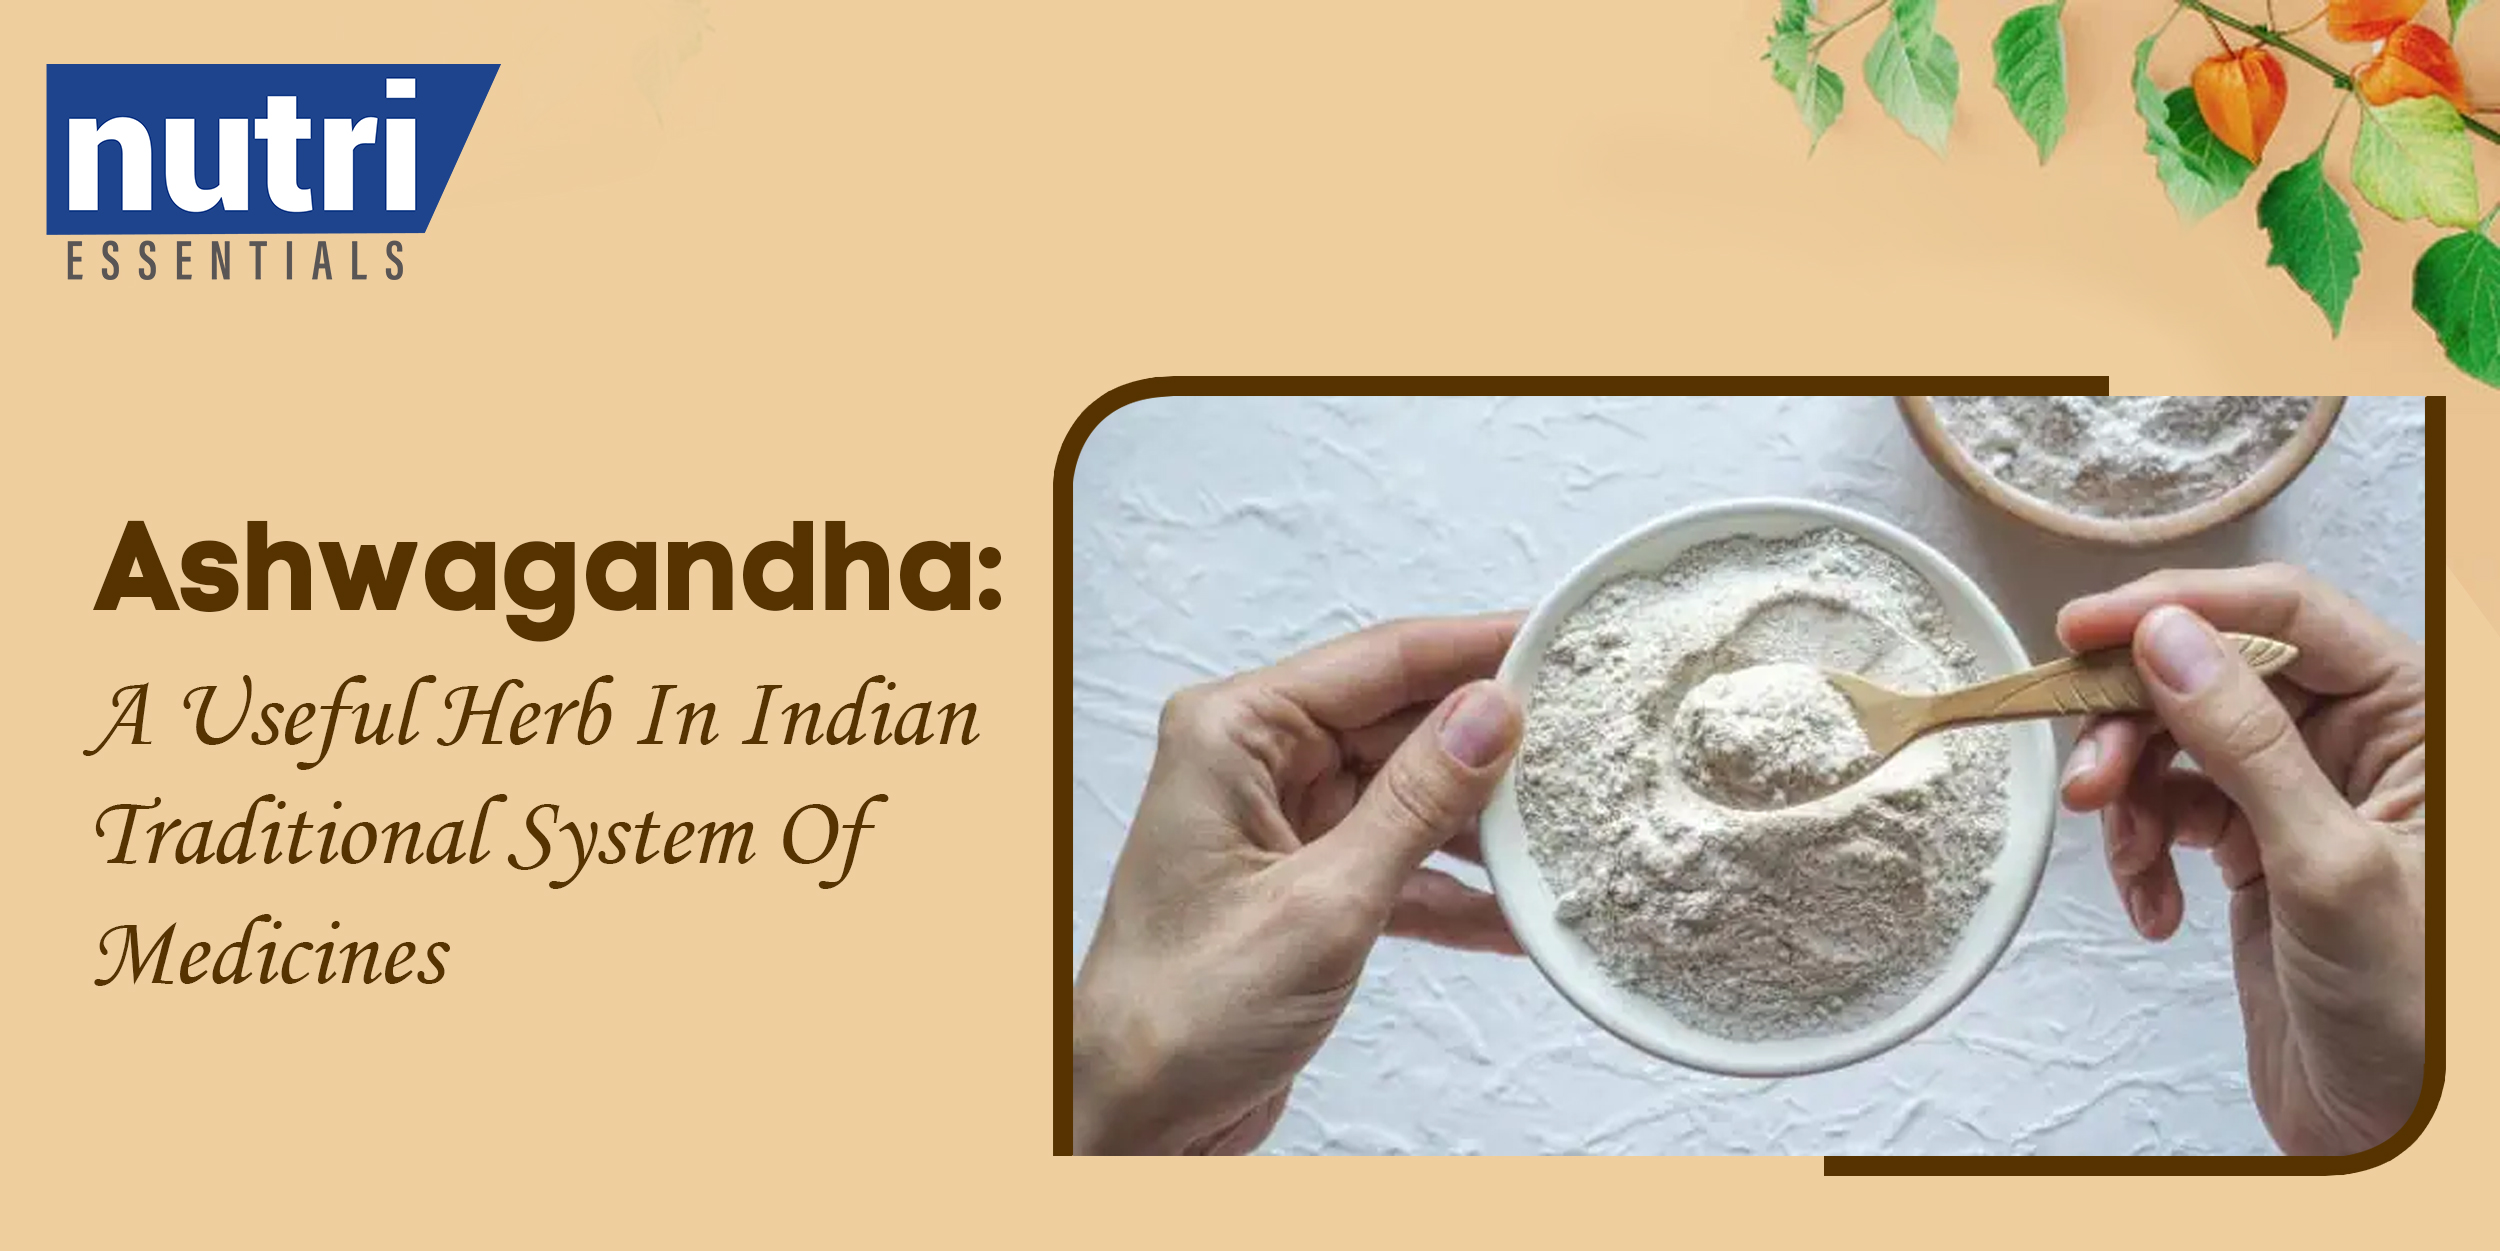 ASHWAGANDHA: A USEFUL HERB IN INDIAN TRADITIONAL SYSTEM OF MEDICINES